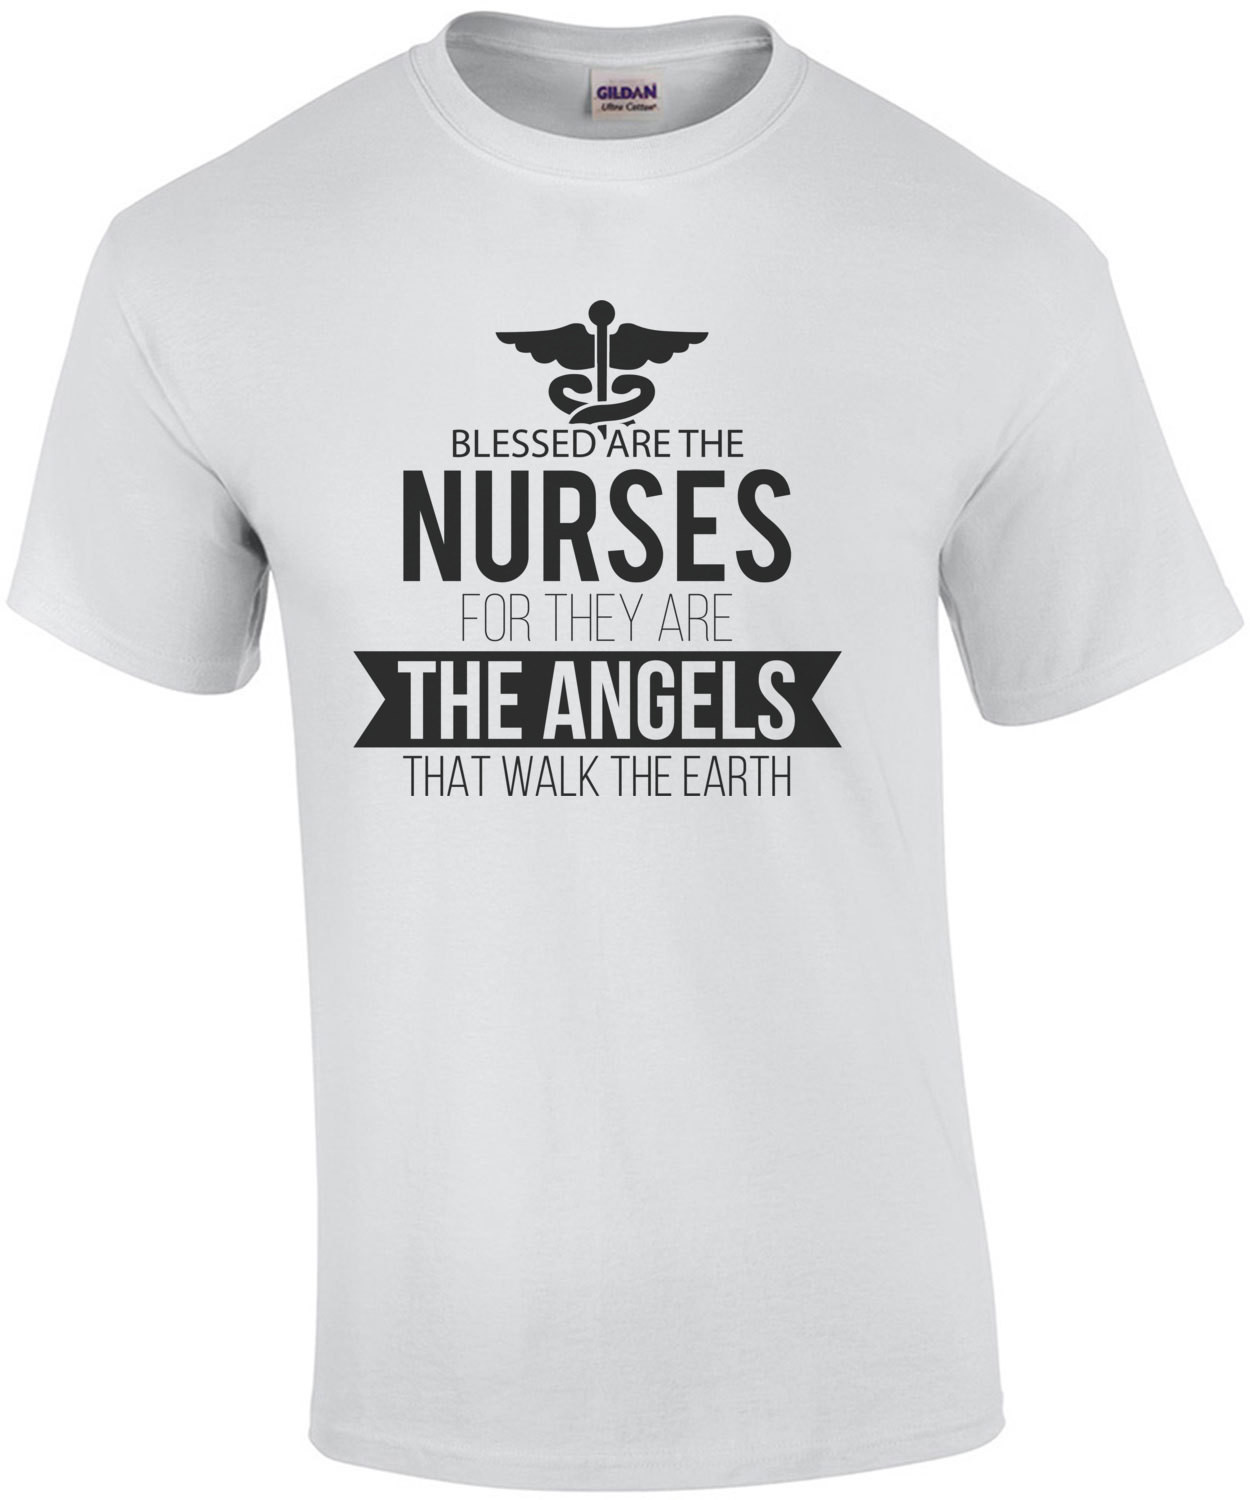 Blessed are the nurses for they are the angels that walk the earth - nurse t-shirt